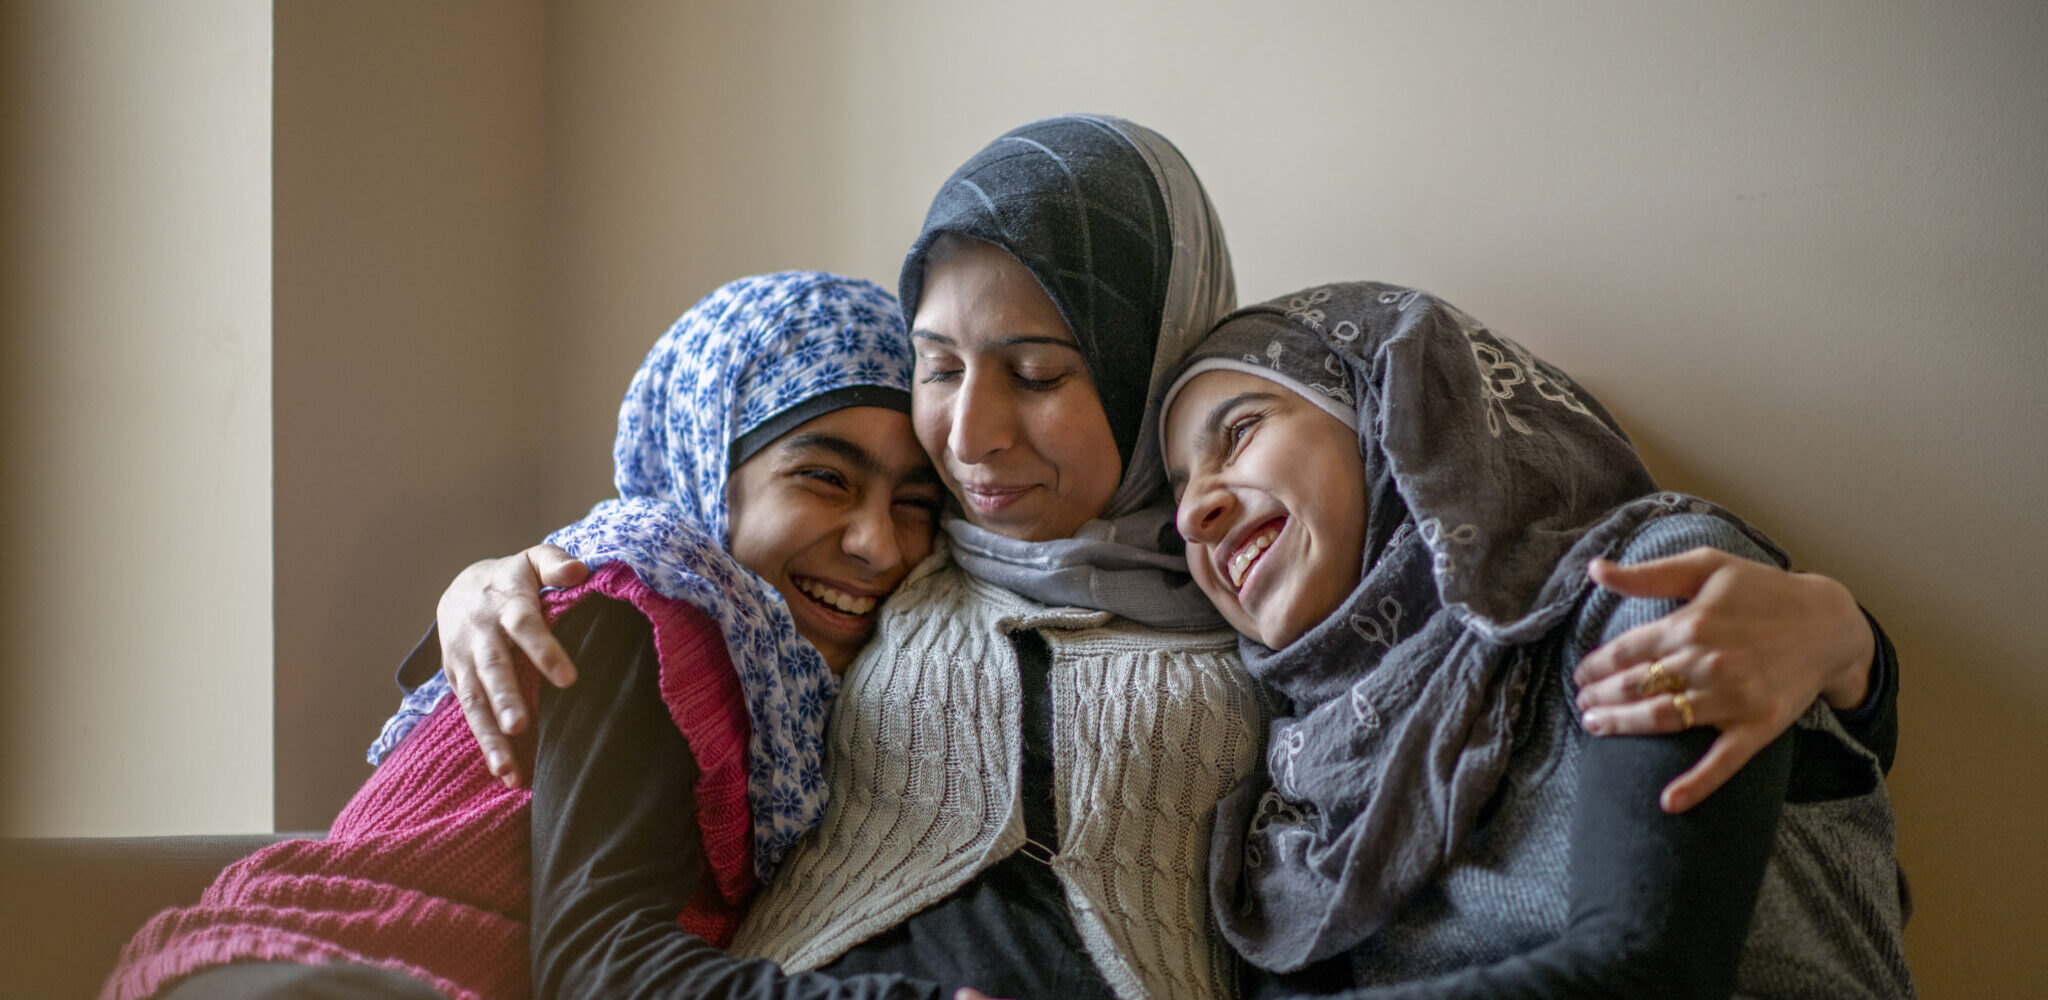 A Muslim mother hugs both her daughters in her arms.